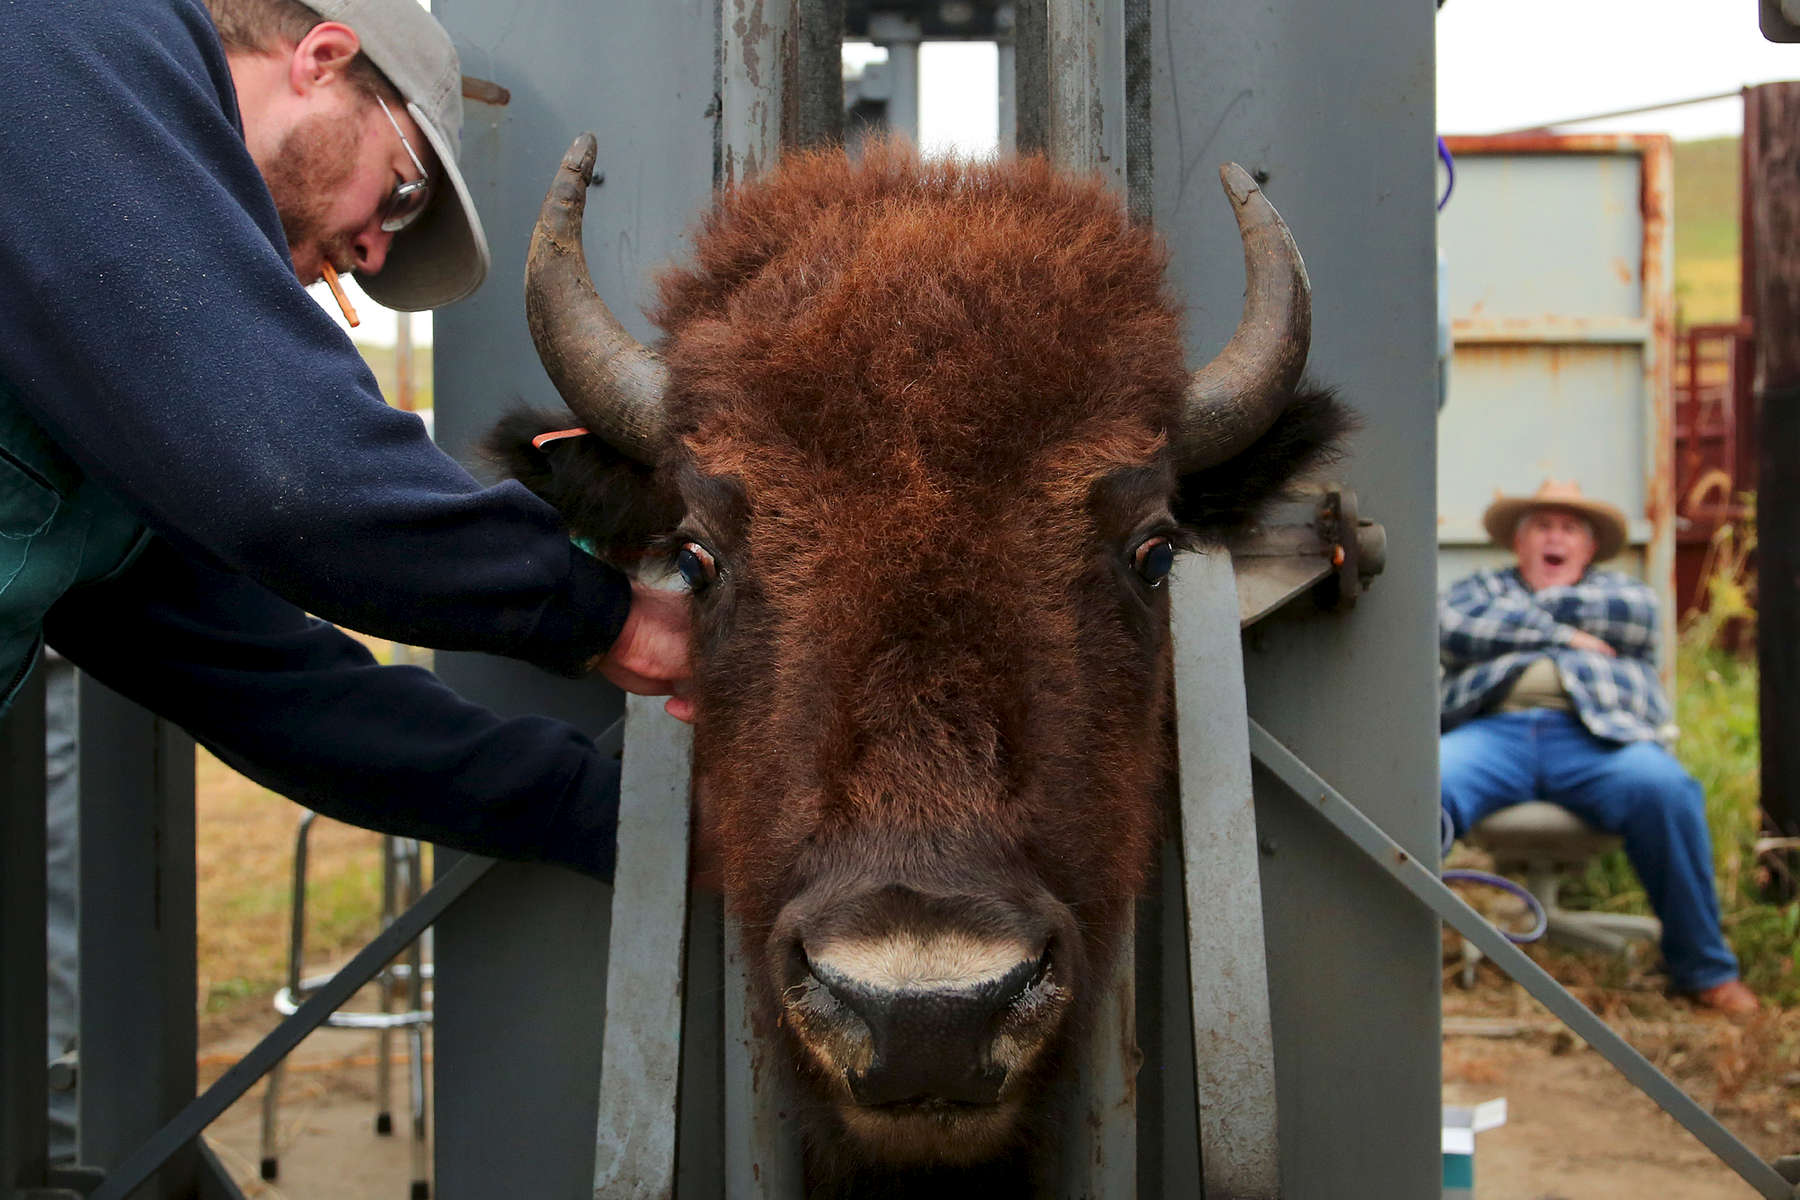 Veterinarian Dr. Travis Hawkins drew blood from a bison as it sat in a squeeze chute. Of the animals processed during the roundup, 20 would return to Illinois to form a new herd at the Nachusa Grasslands.